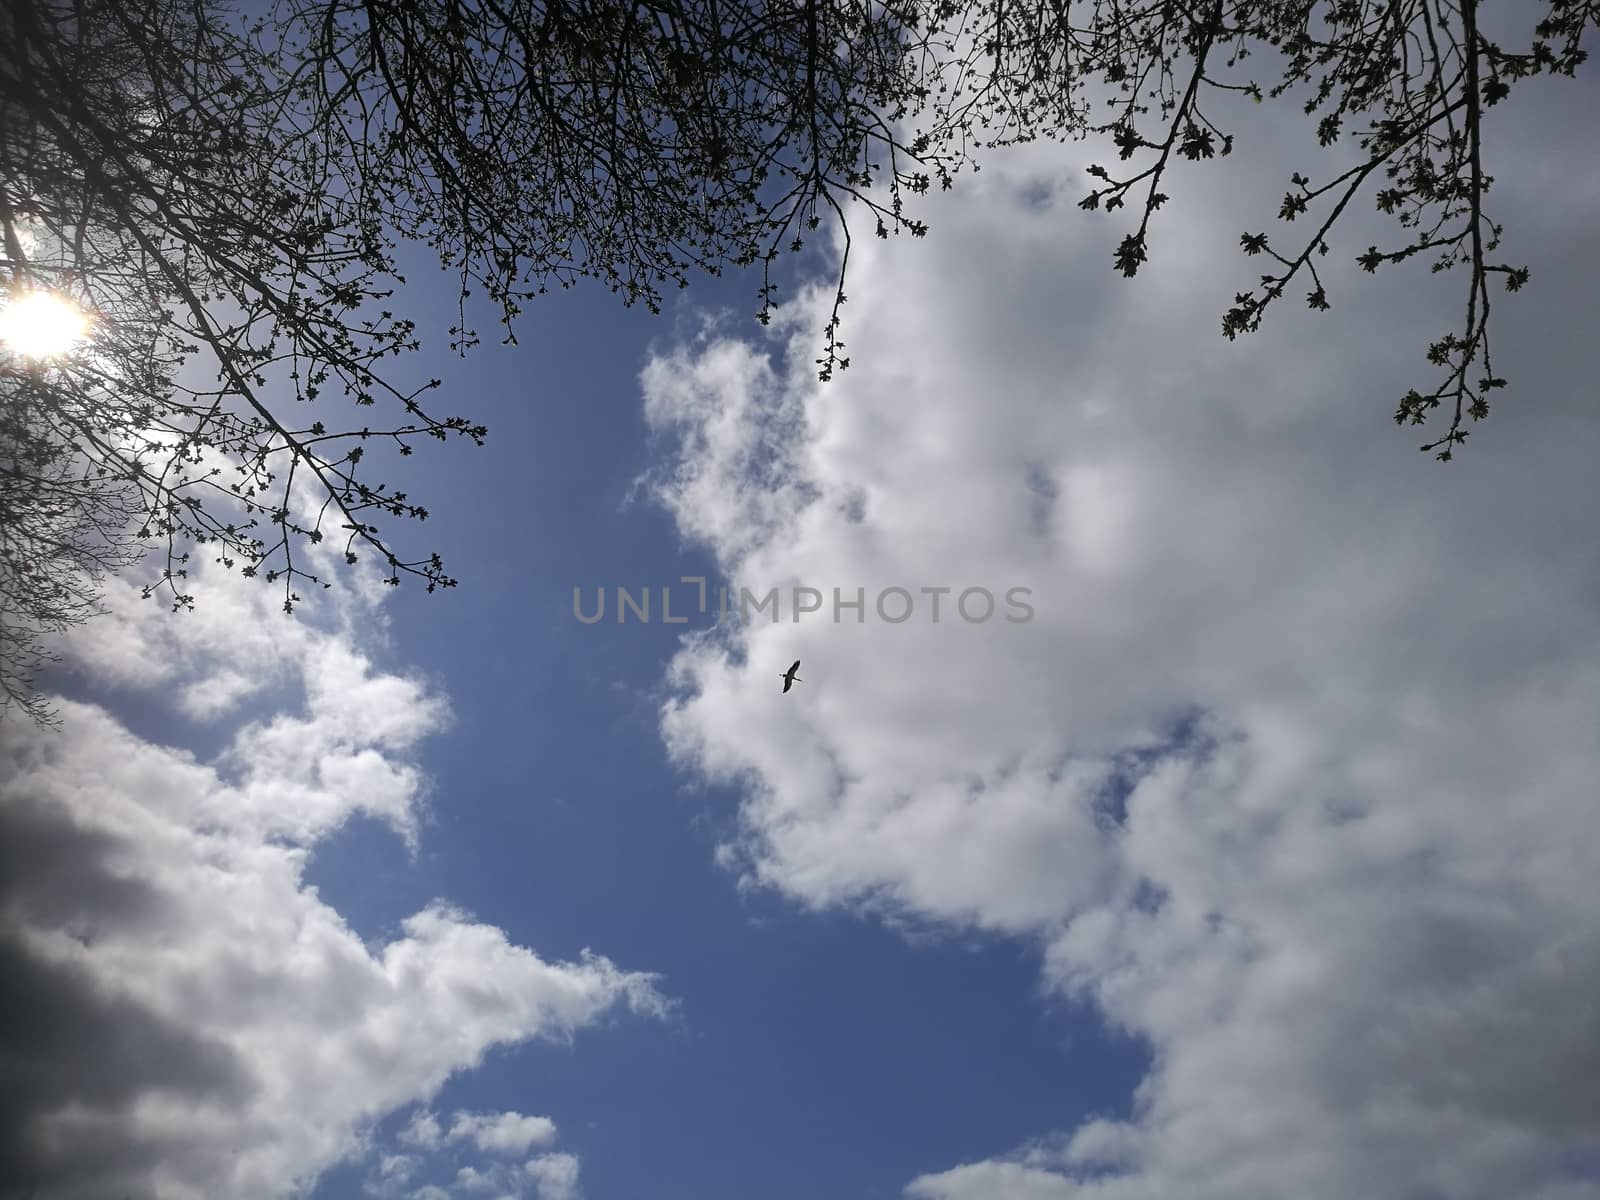 view to the blue sky with some clouds and trees at the side